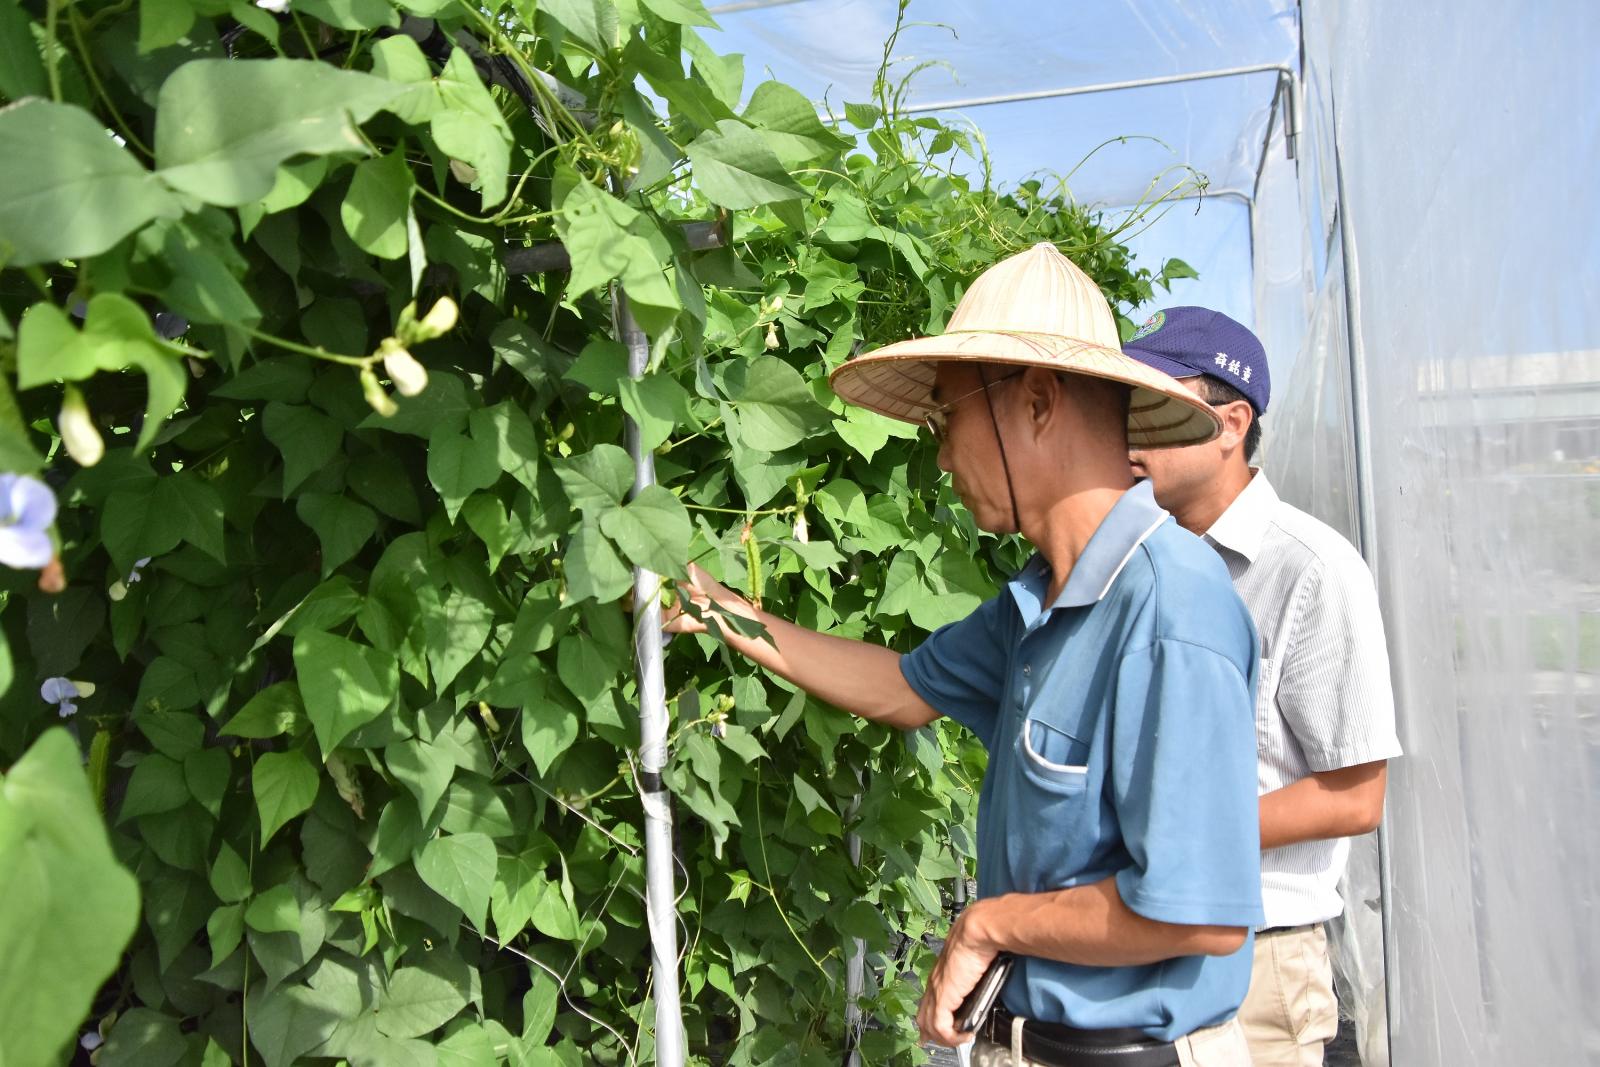 A council member inspects winged bean Taitung no. 1 growing in the field.